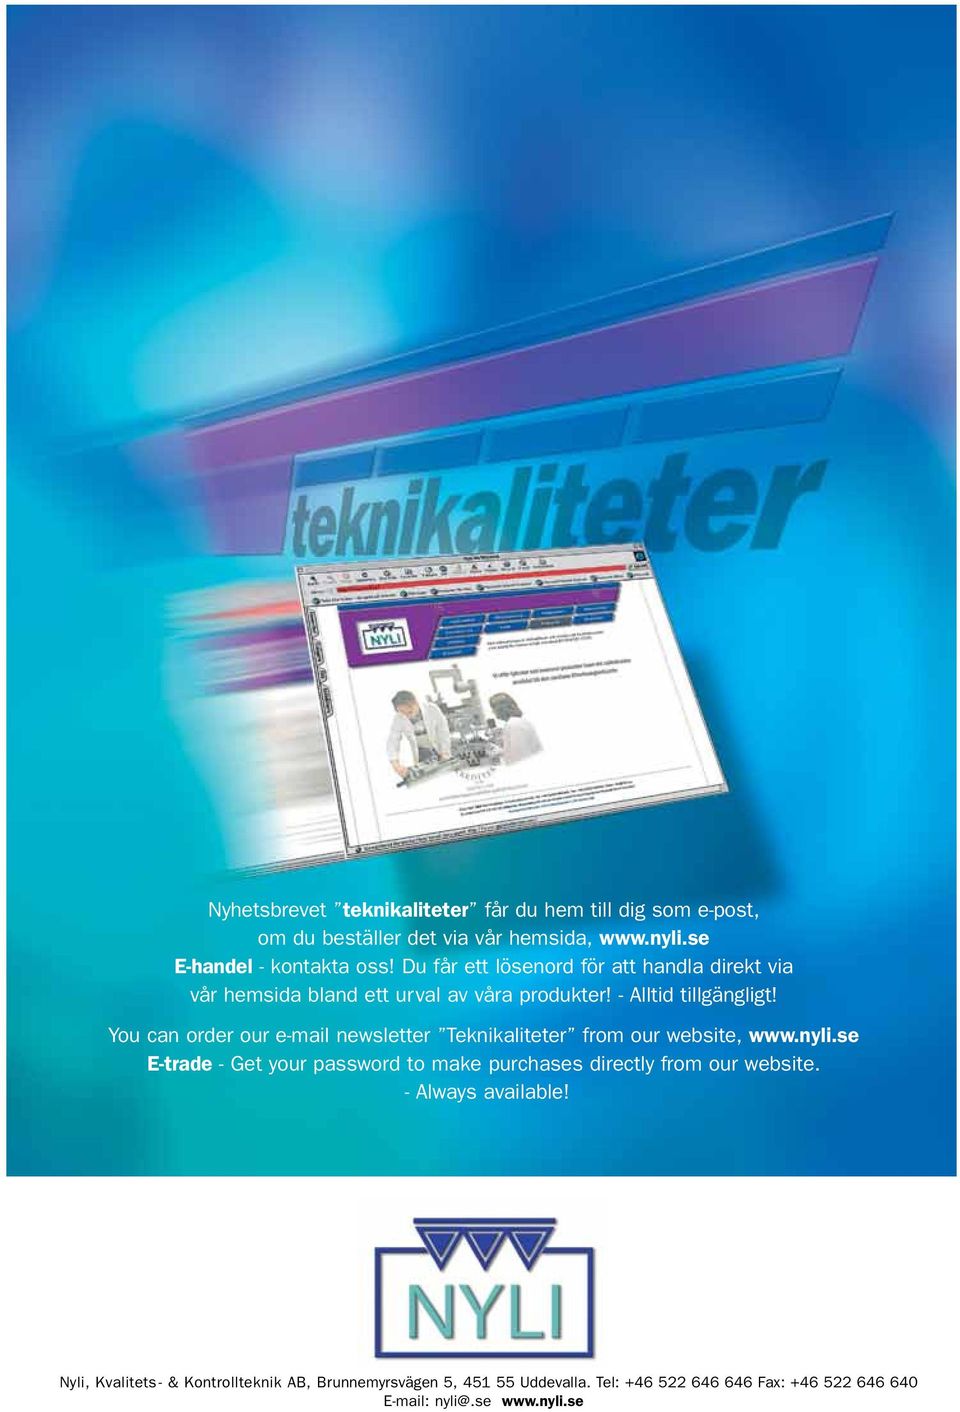 You can order our e-mail newsletter Teknikaliteter from our website, www.nyli.